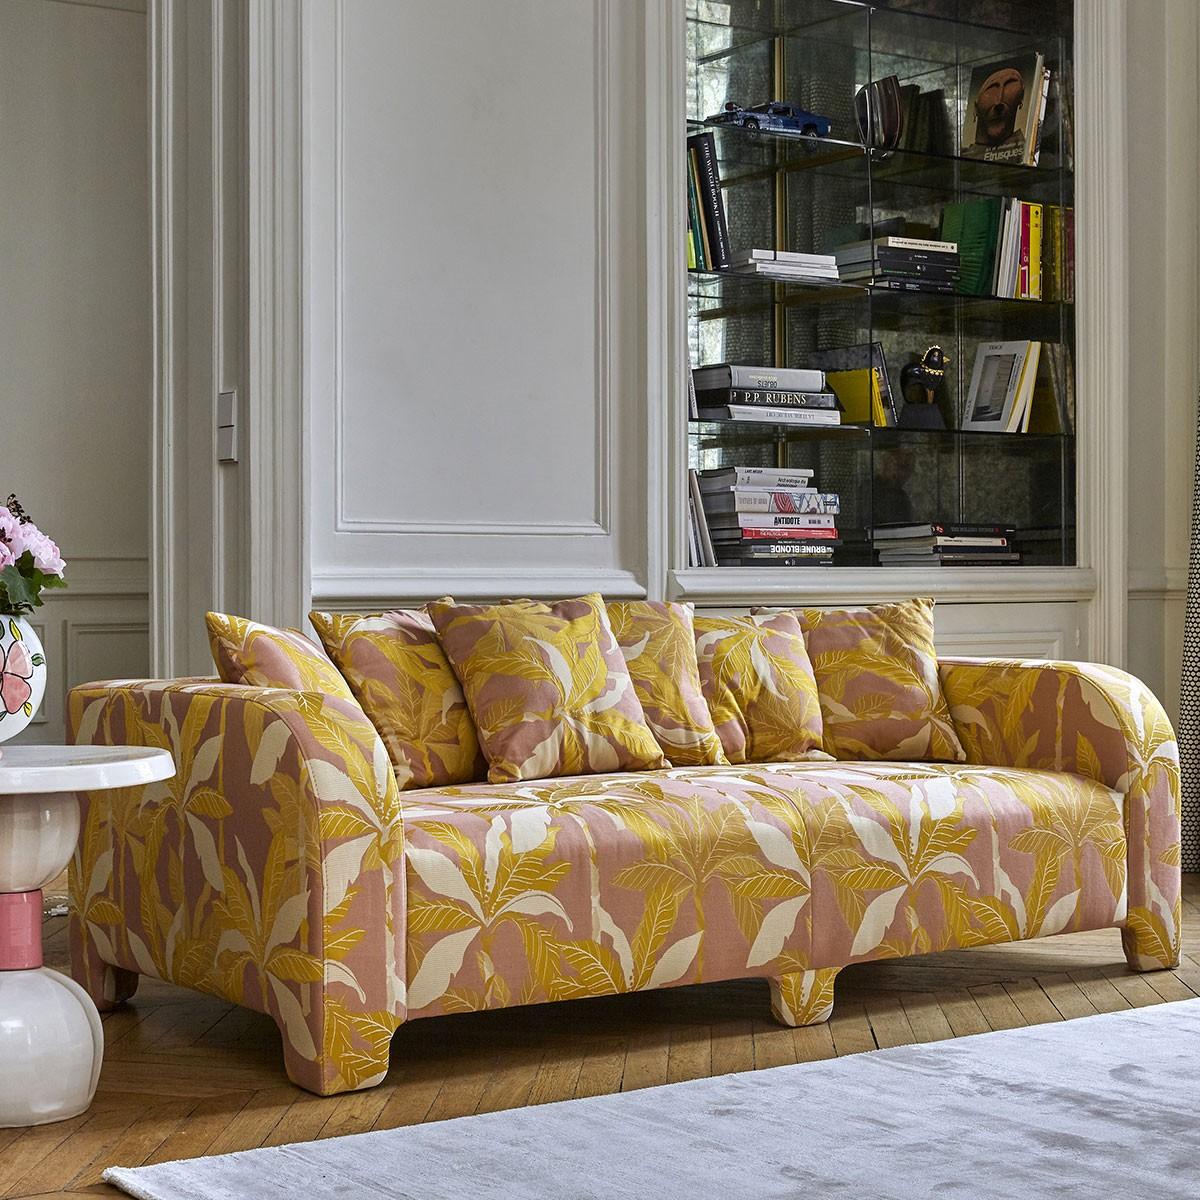 Popus editions Graziella 3 seater sofa in yellow como velvet upholstery

A foot that hides another. A cushion that hides another. A curve that hides another with contemporary lines and a base like a punctuation mark, this sofa gives pride of place